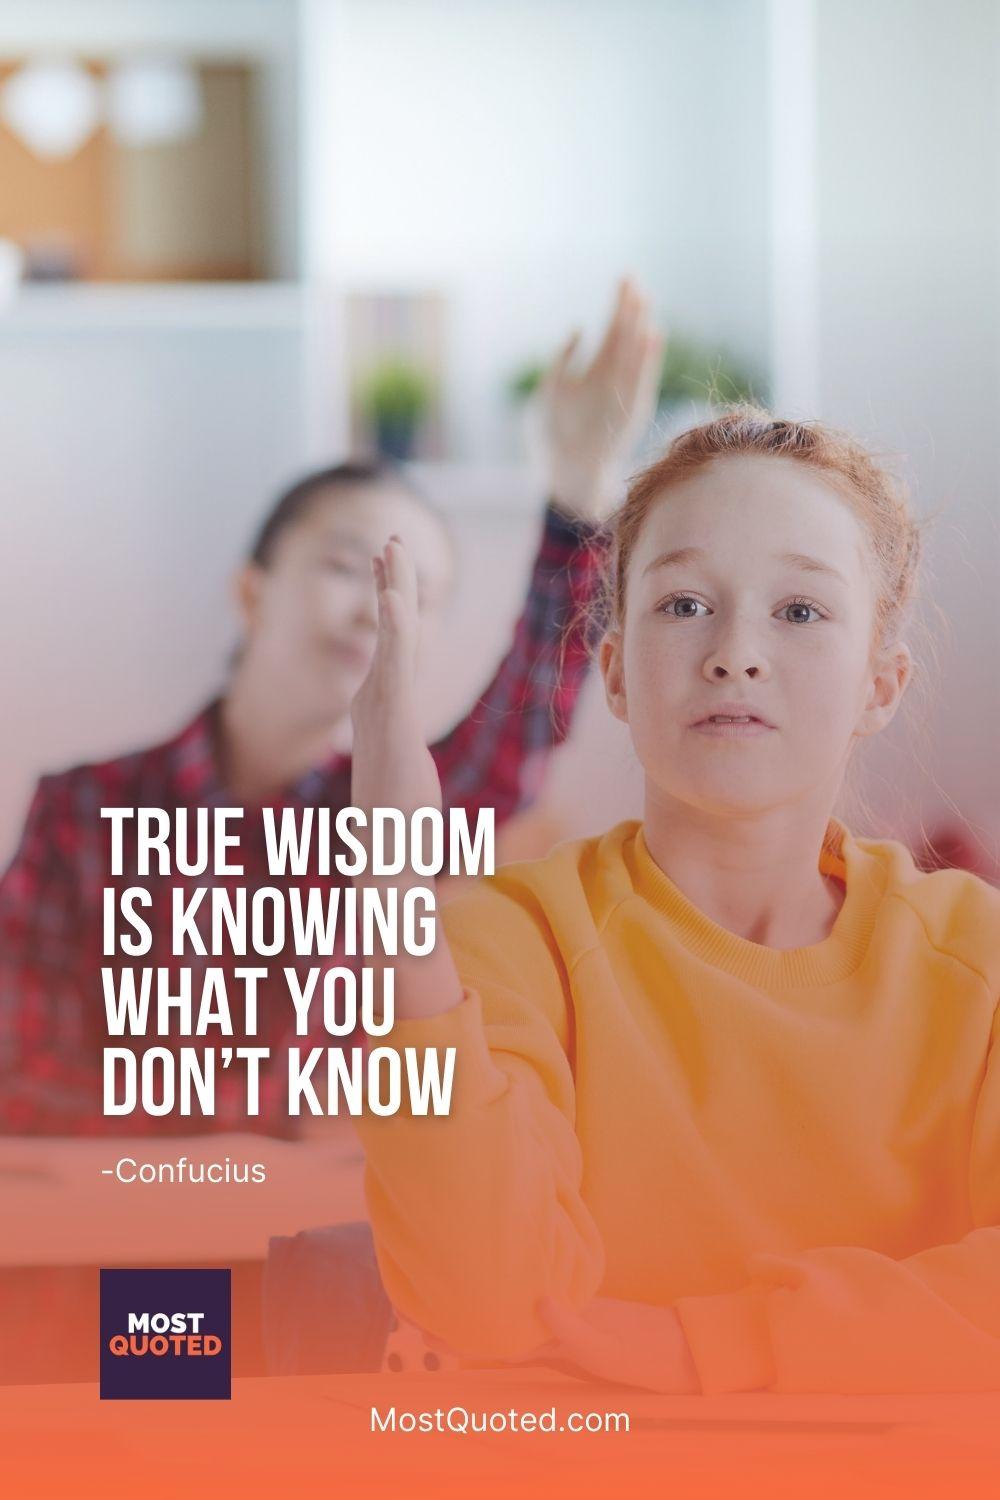 True wisdom is knowing what you don’t know - Confucius